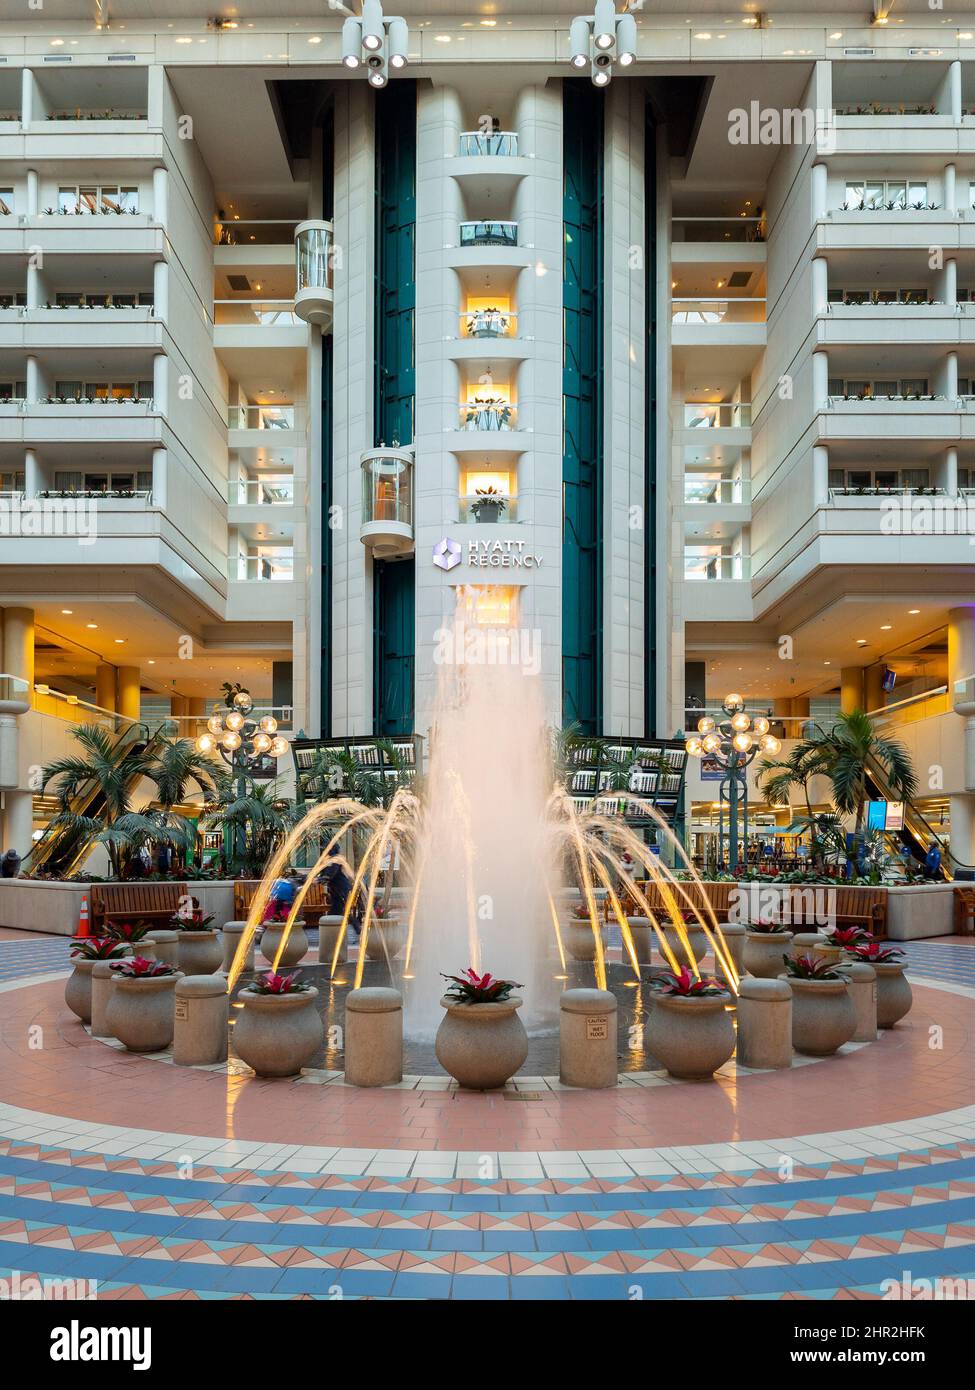 Orlando, Florida - February 9, 2022: Vertical View of Terminal B Main Hall inside Orlando International Airport (MCO) with Fountain in Foreground and Stock Photo